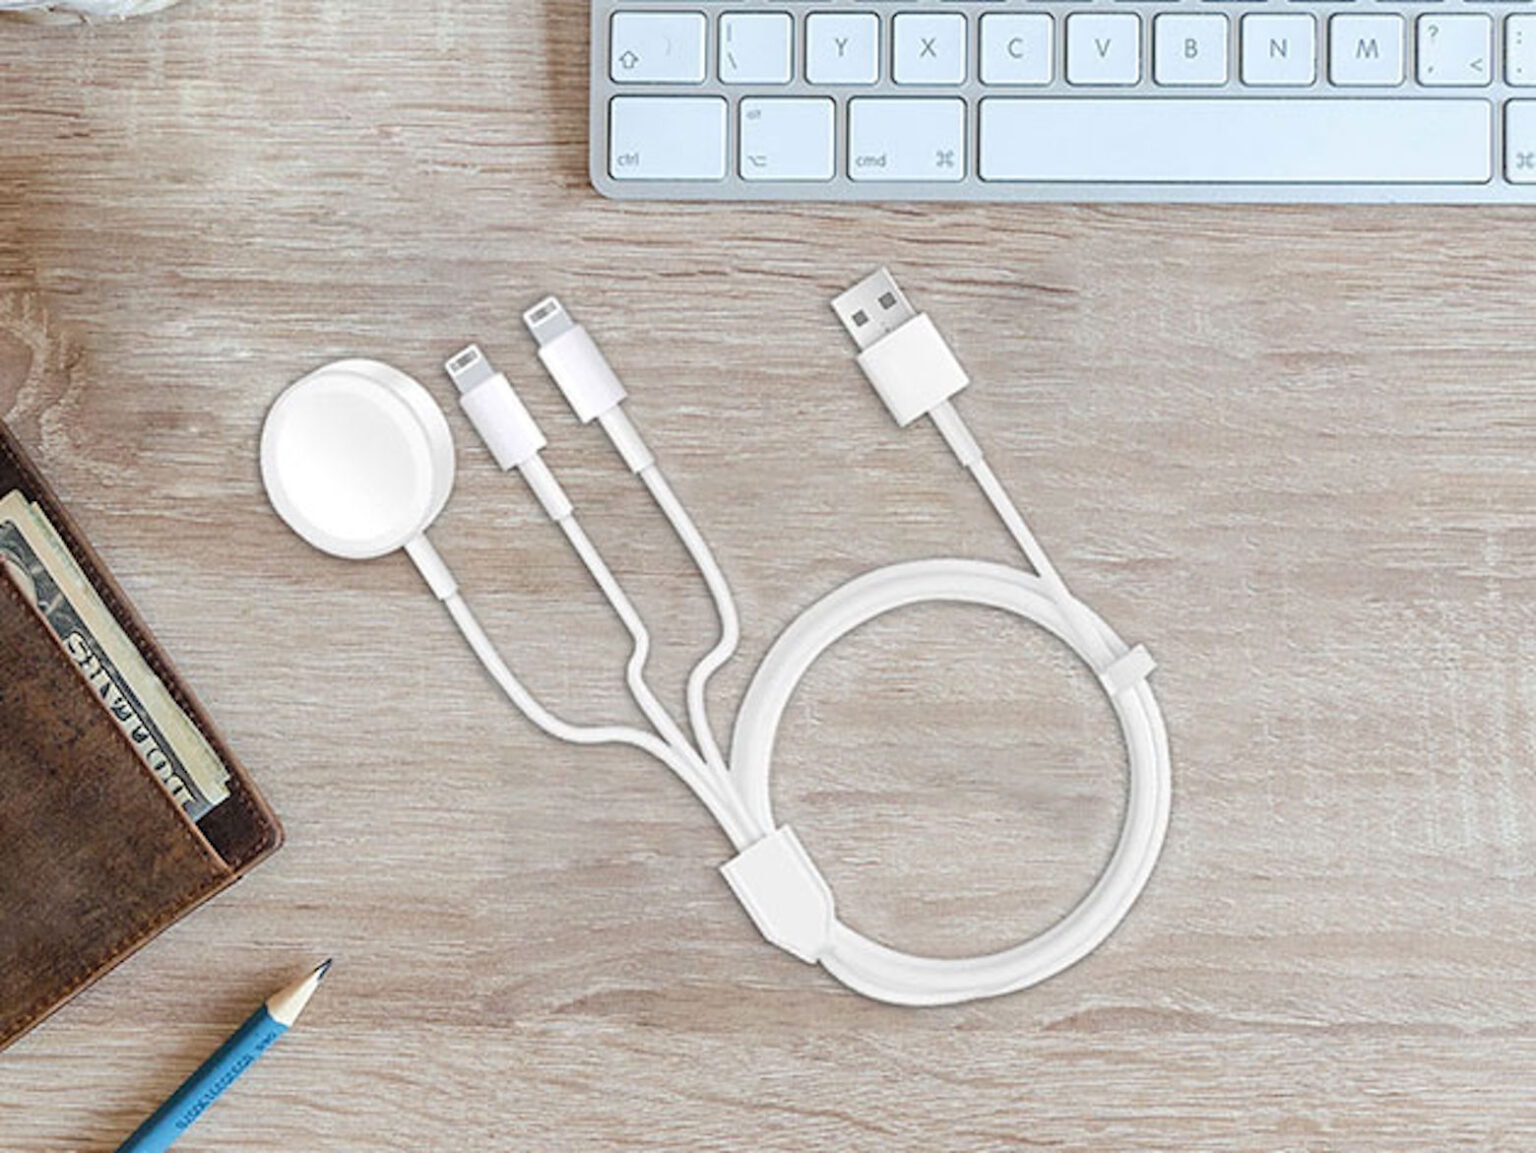 This 3-in-1 Apple charger is convenient and portable.